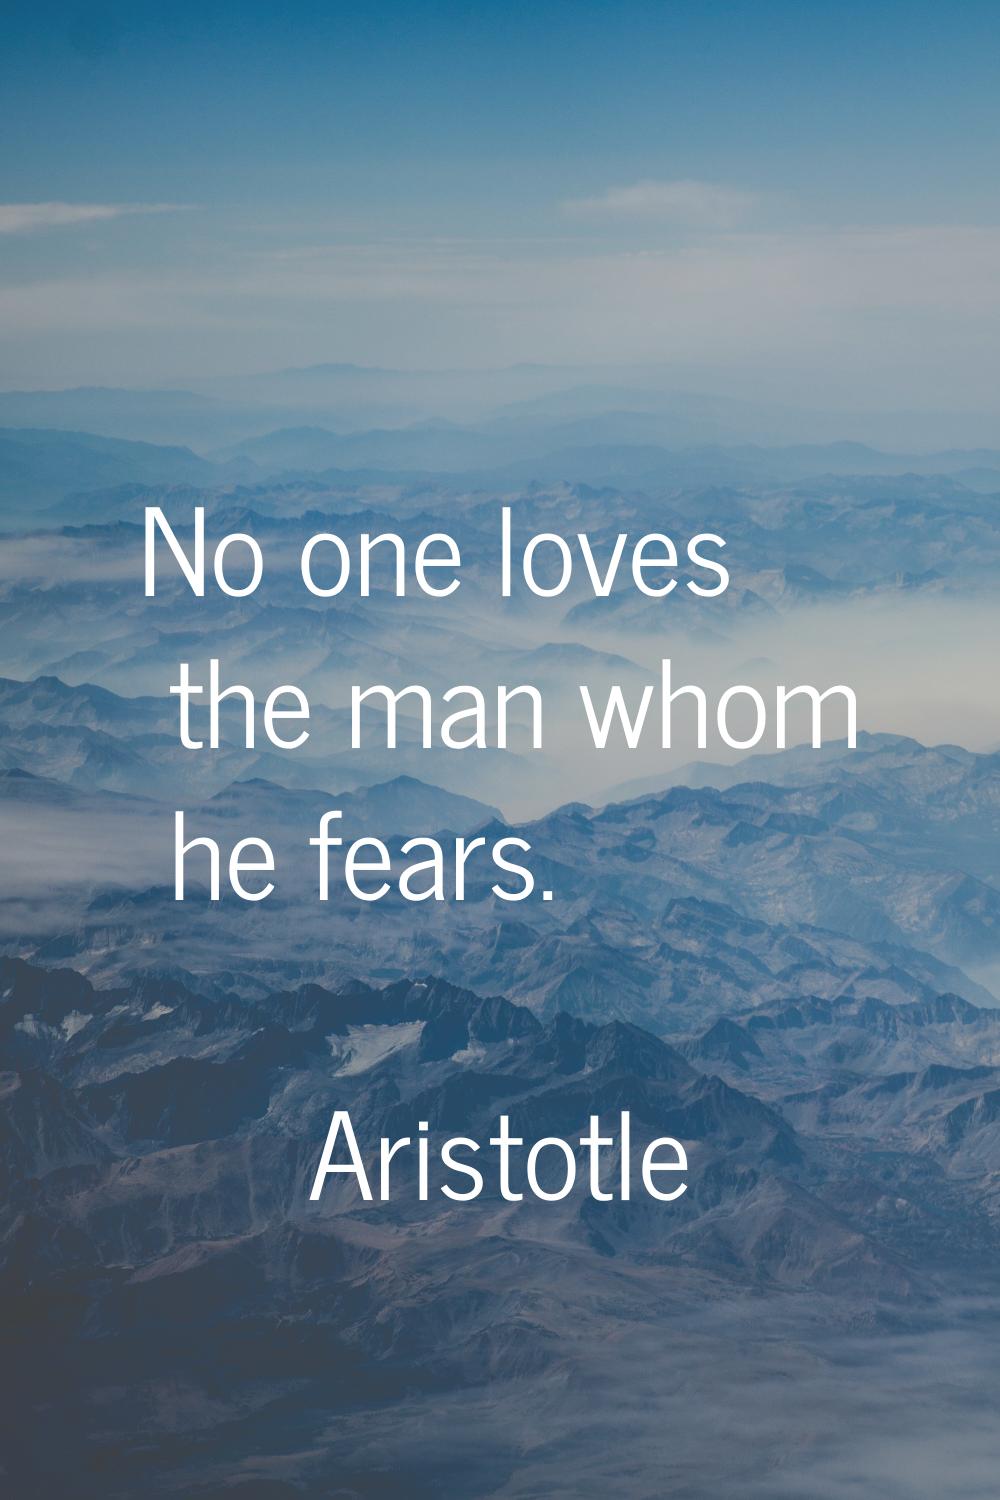 No one loves the man whom he fears.